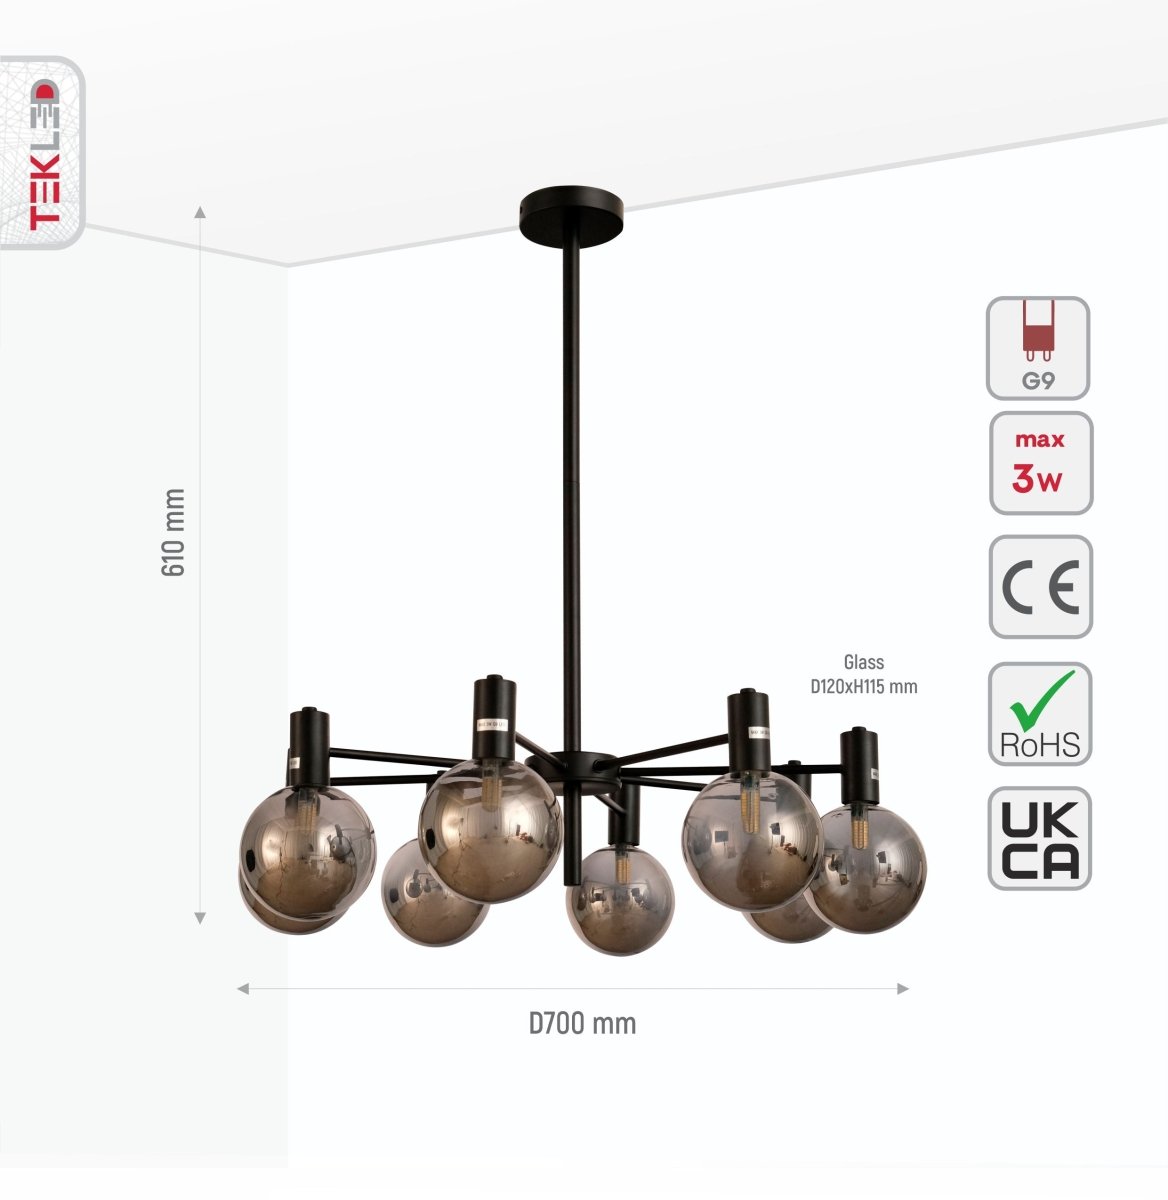 Size and specs of Black and Smoky Chandelier with 8xG9 Fitting | TEKLED 158-19620